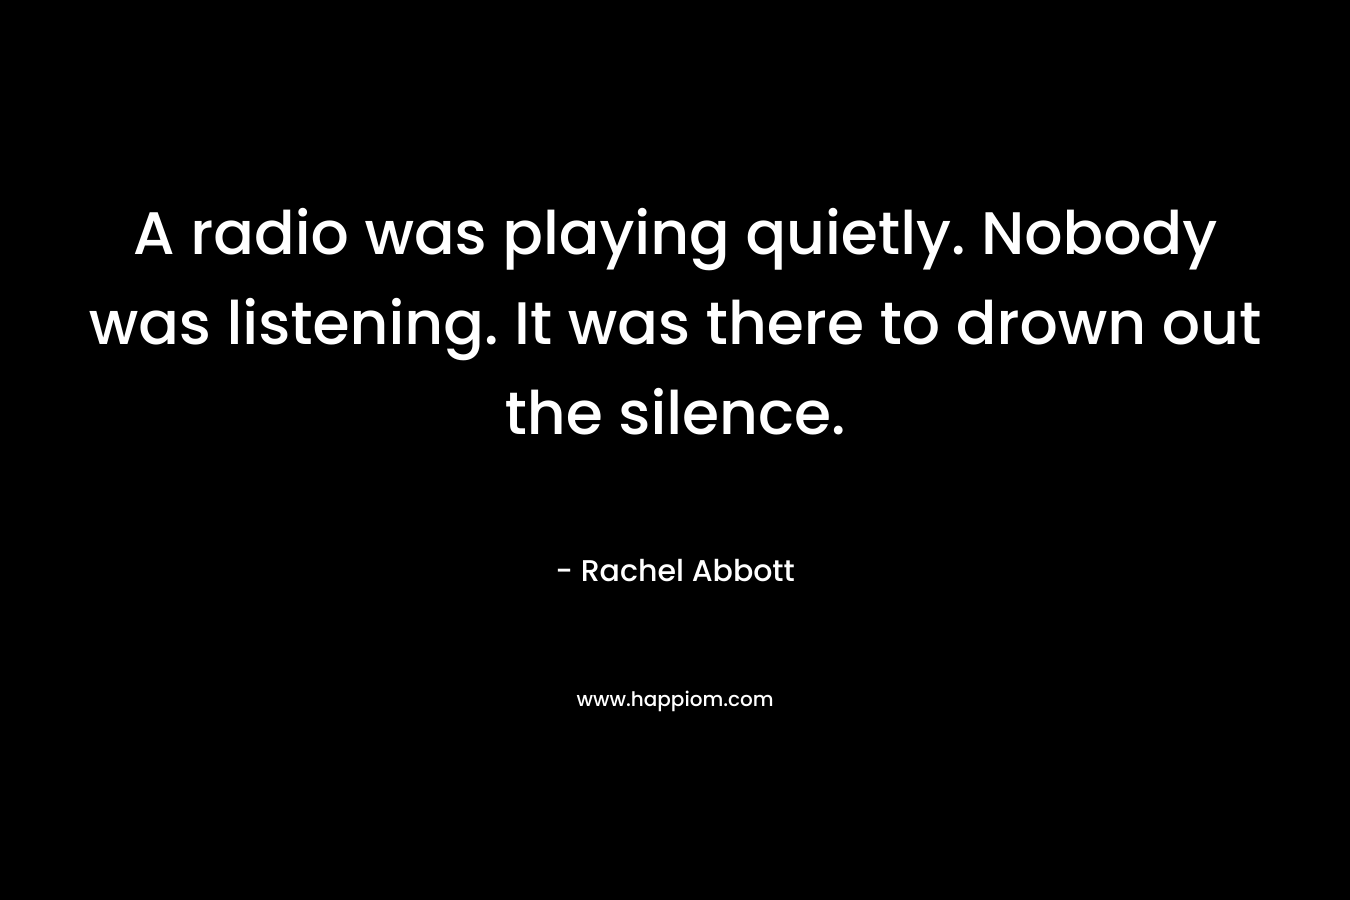 A radio was playing quietly. Nobody was listening. It was there to drown out the silence.